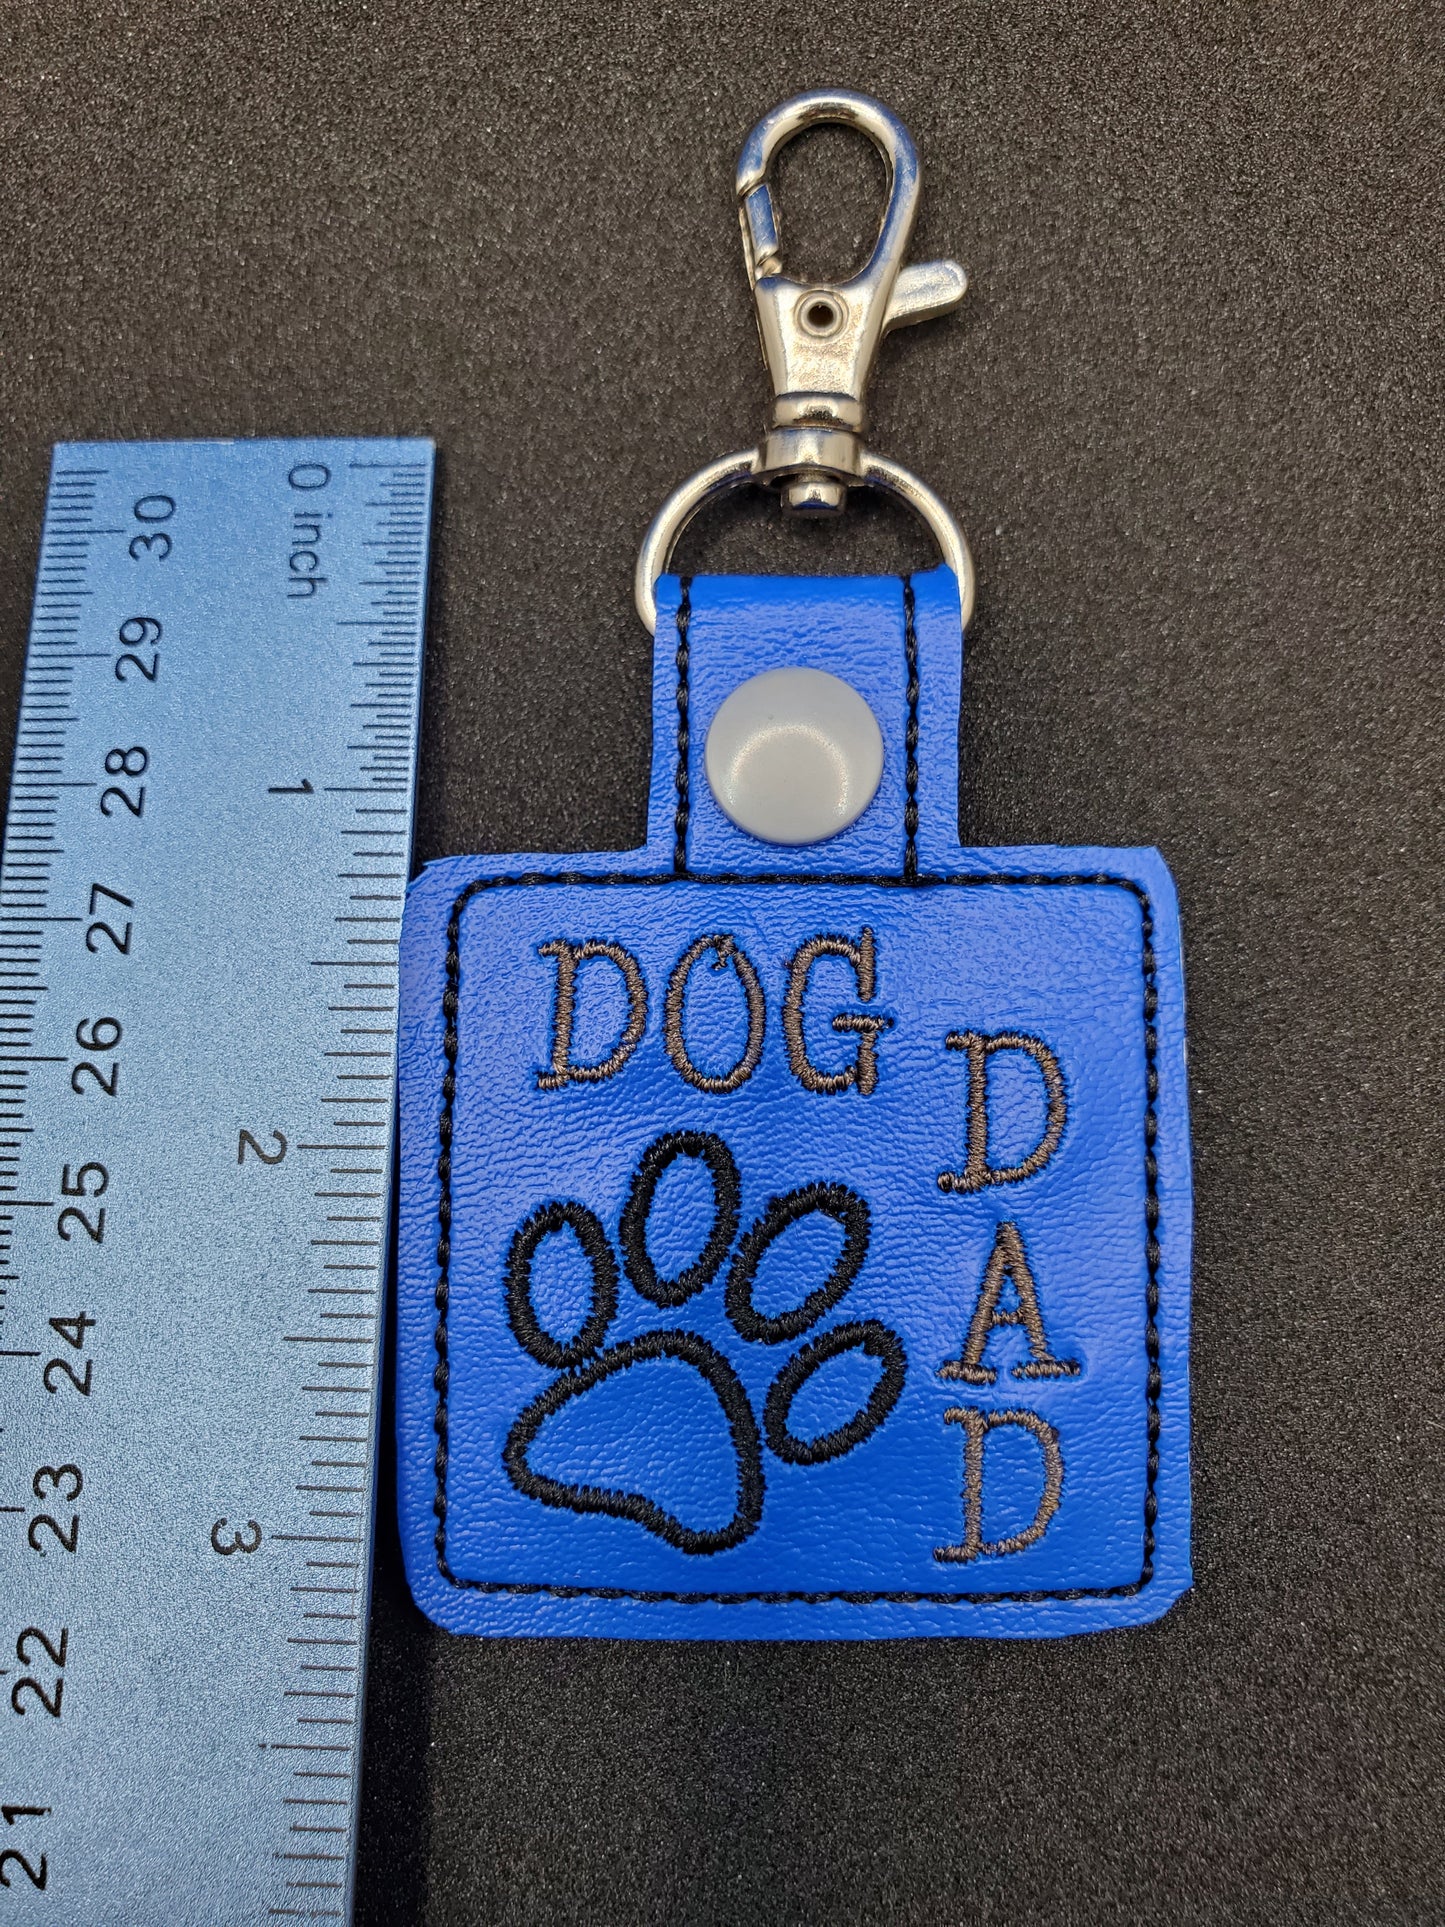 Dog Dad - Words stitched in gray, Key Chain / Backpack Charm